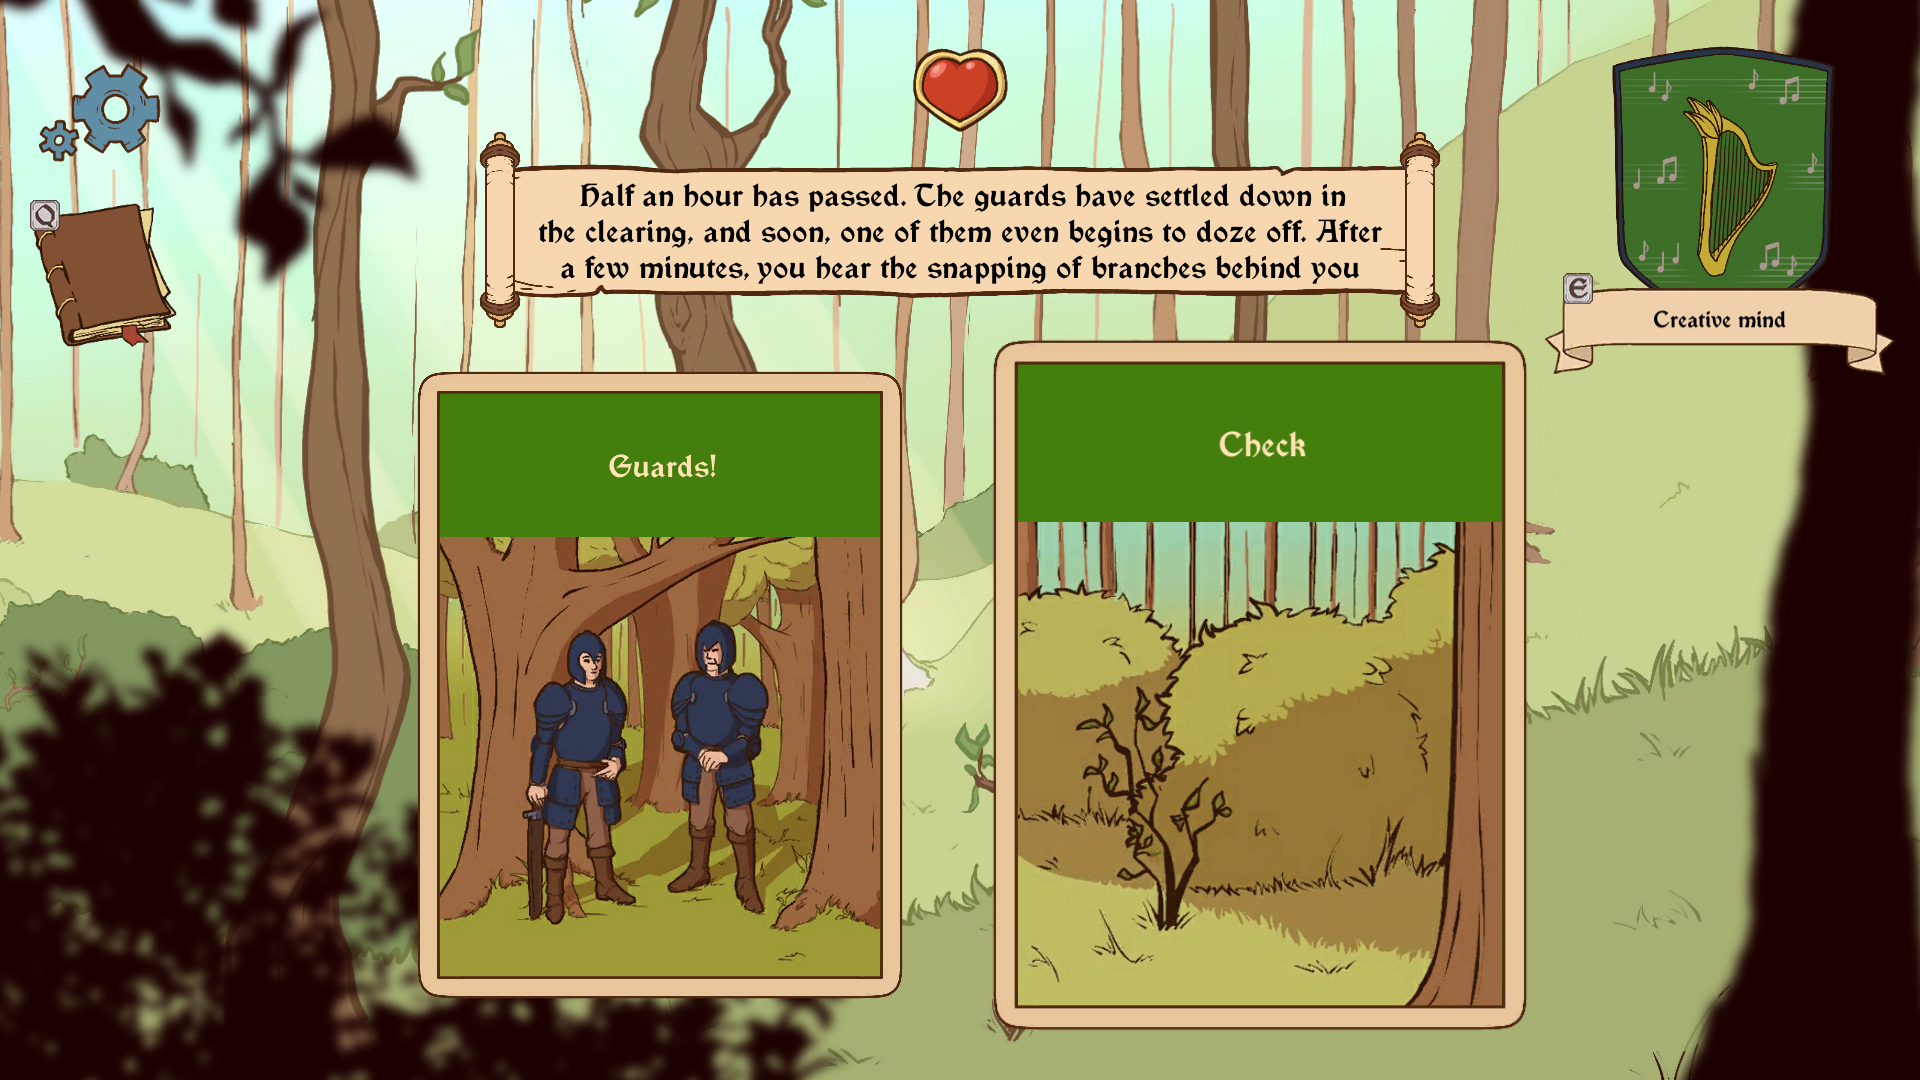 Choice of Life: Middle Ages 2 - Android game screenshots.